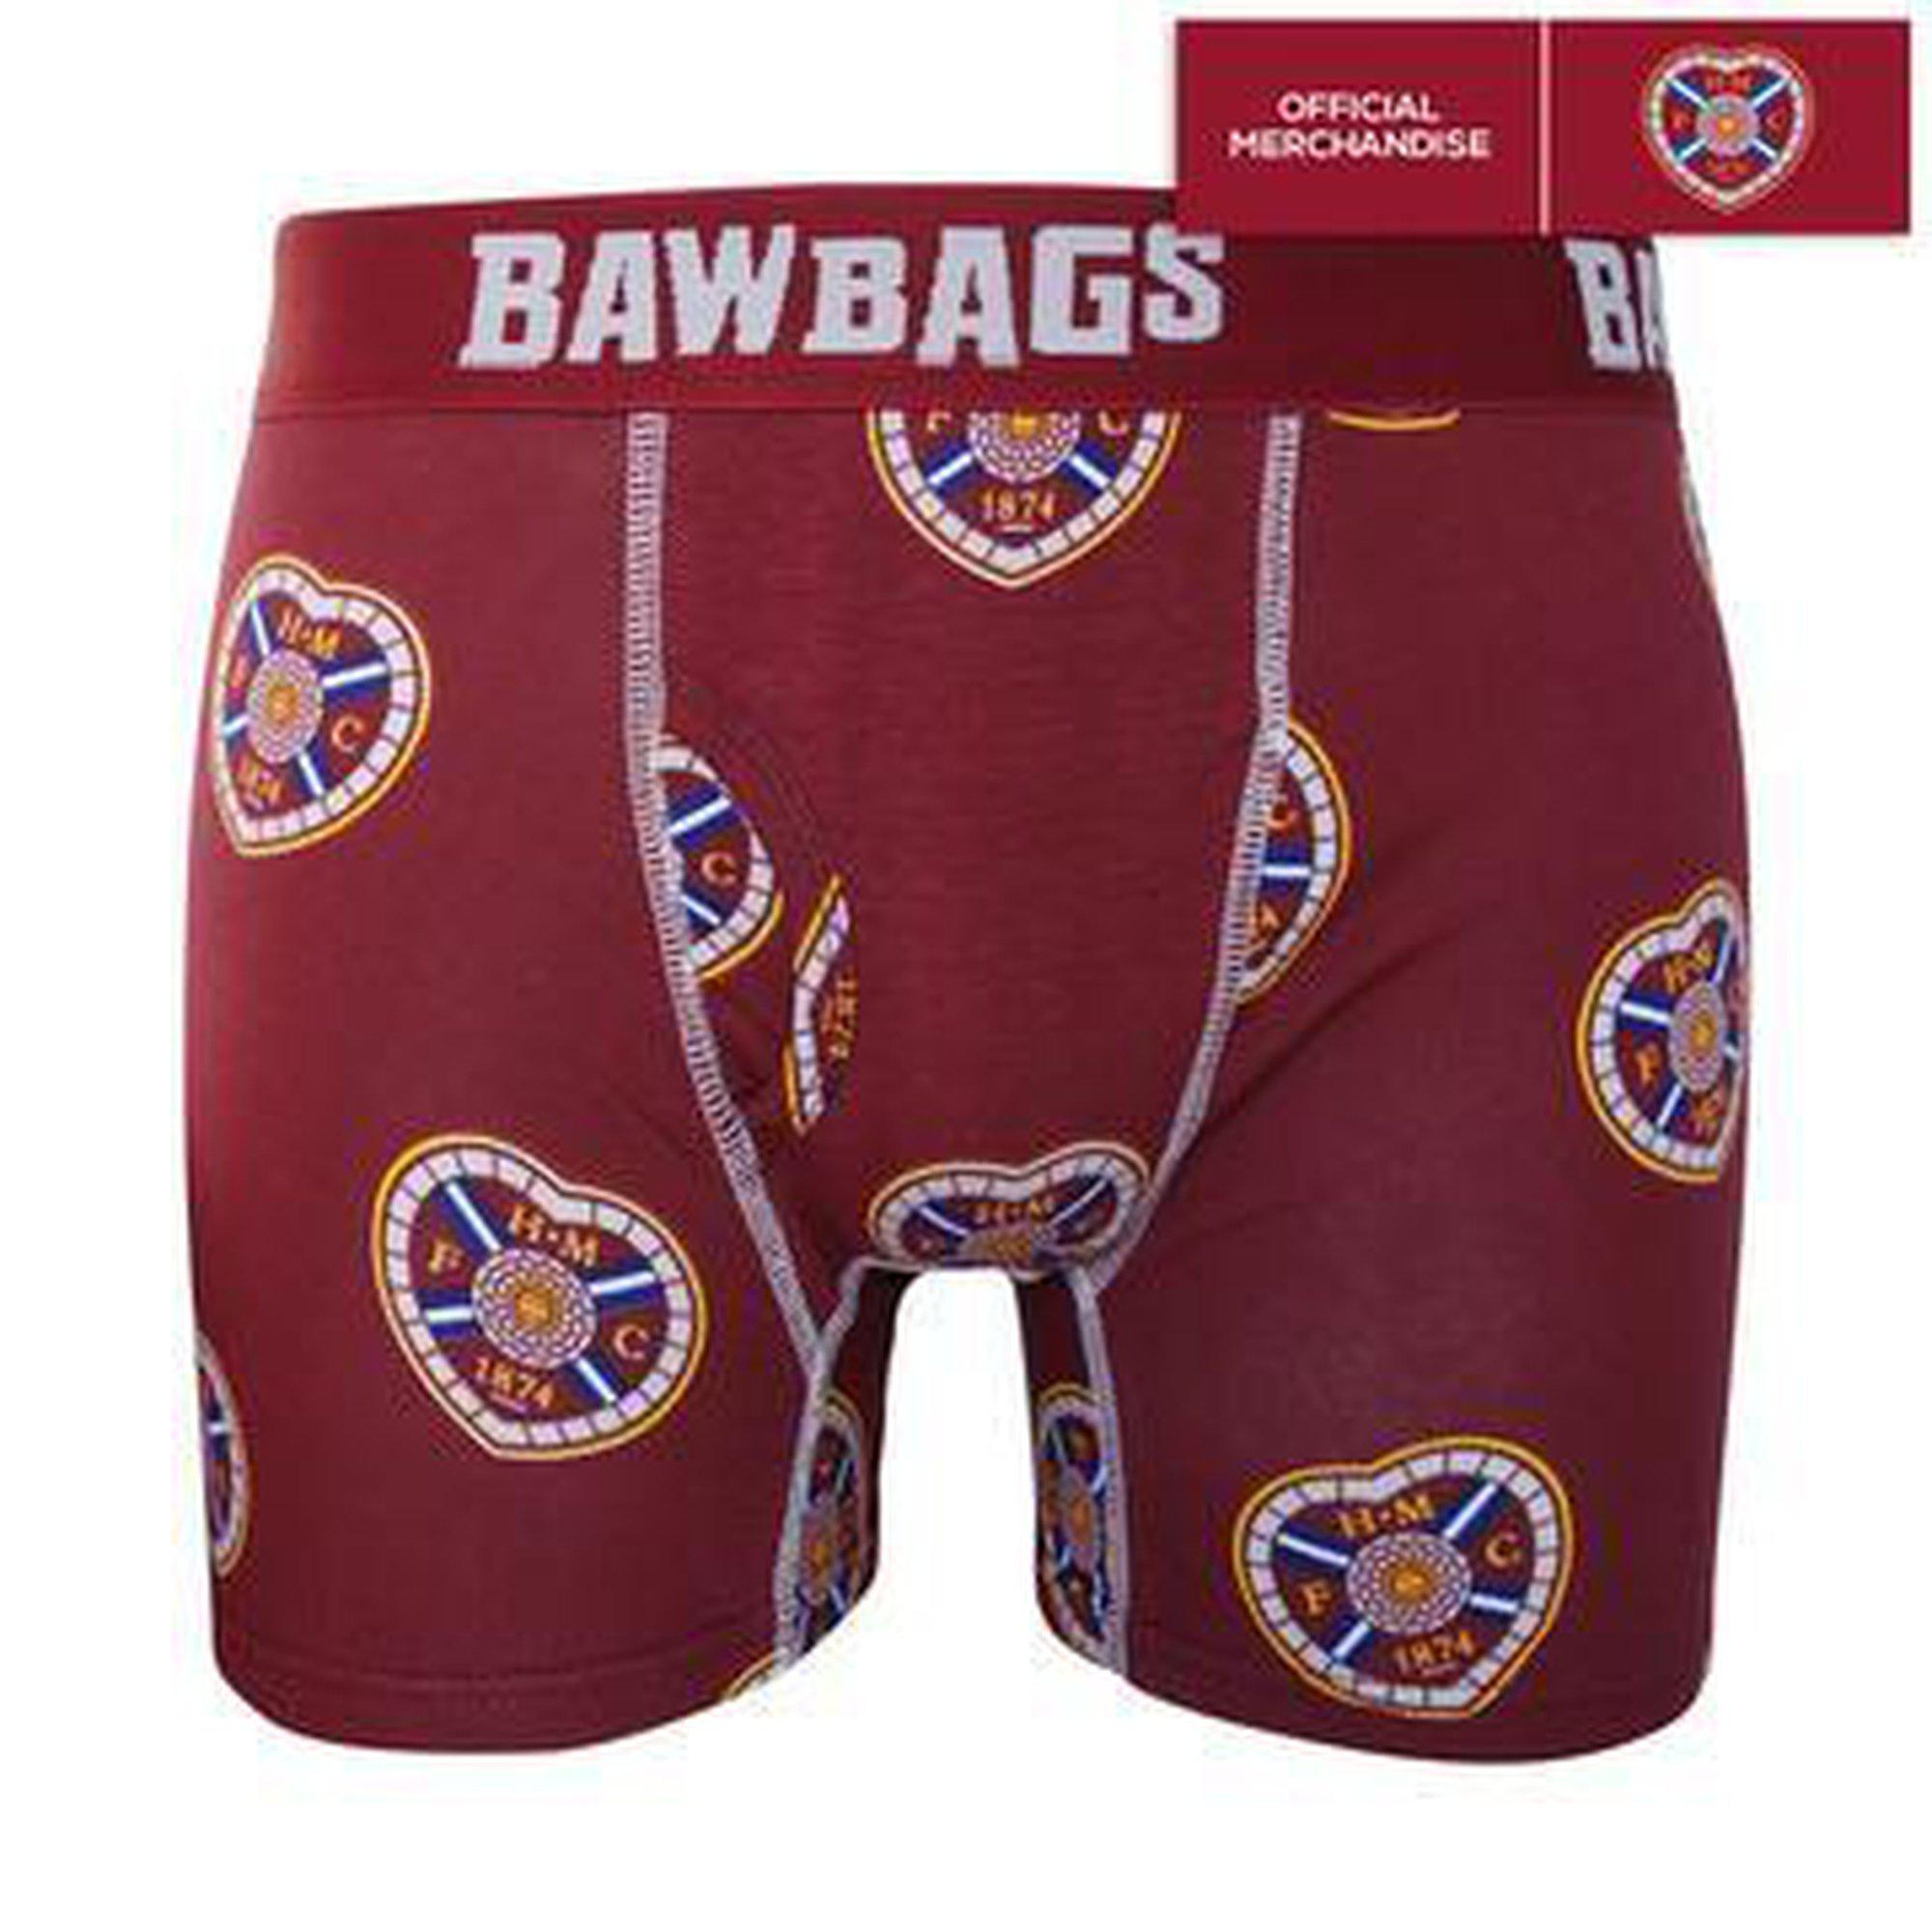 Bawbags Boxer Shorts and Underwear!